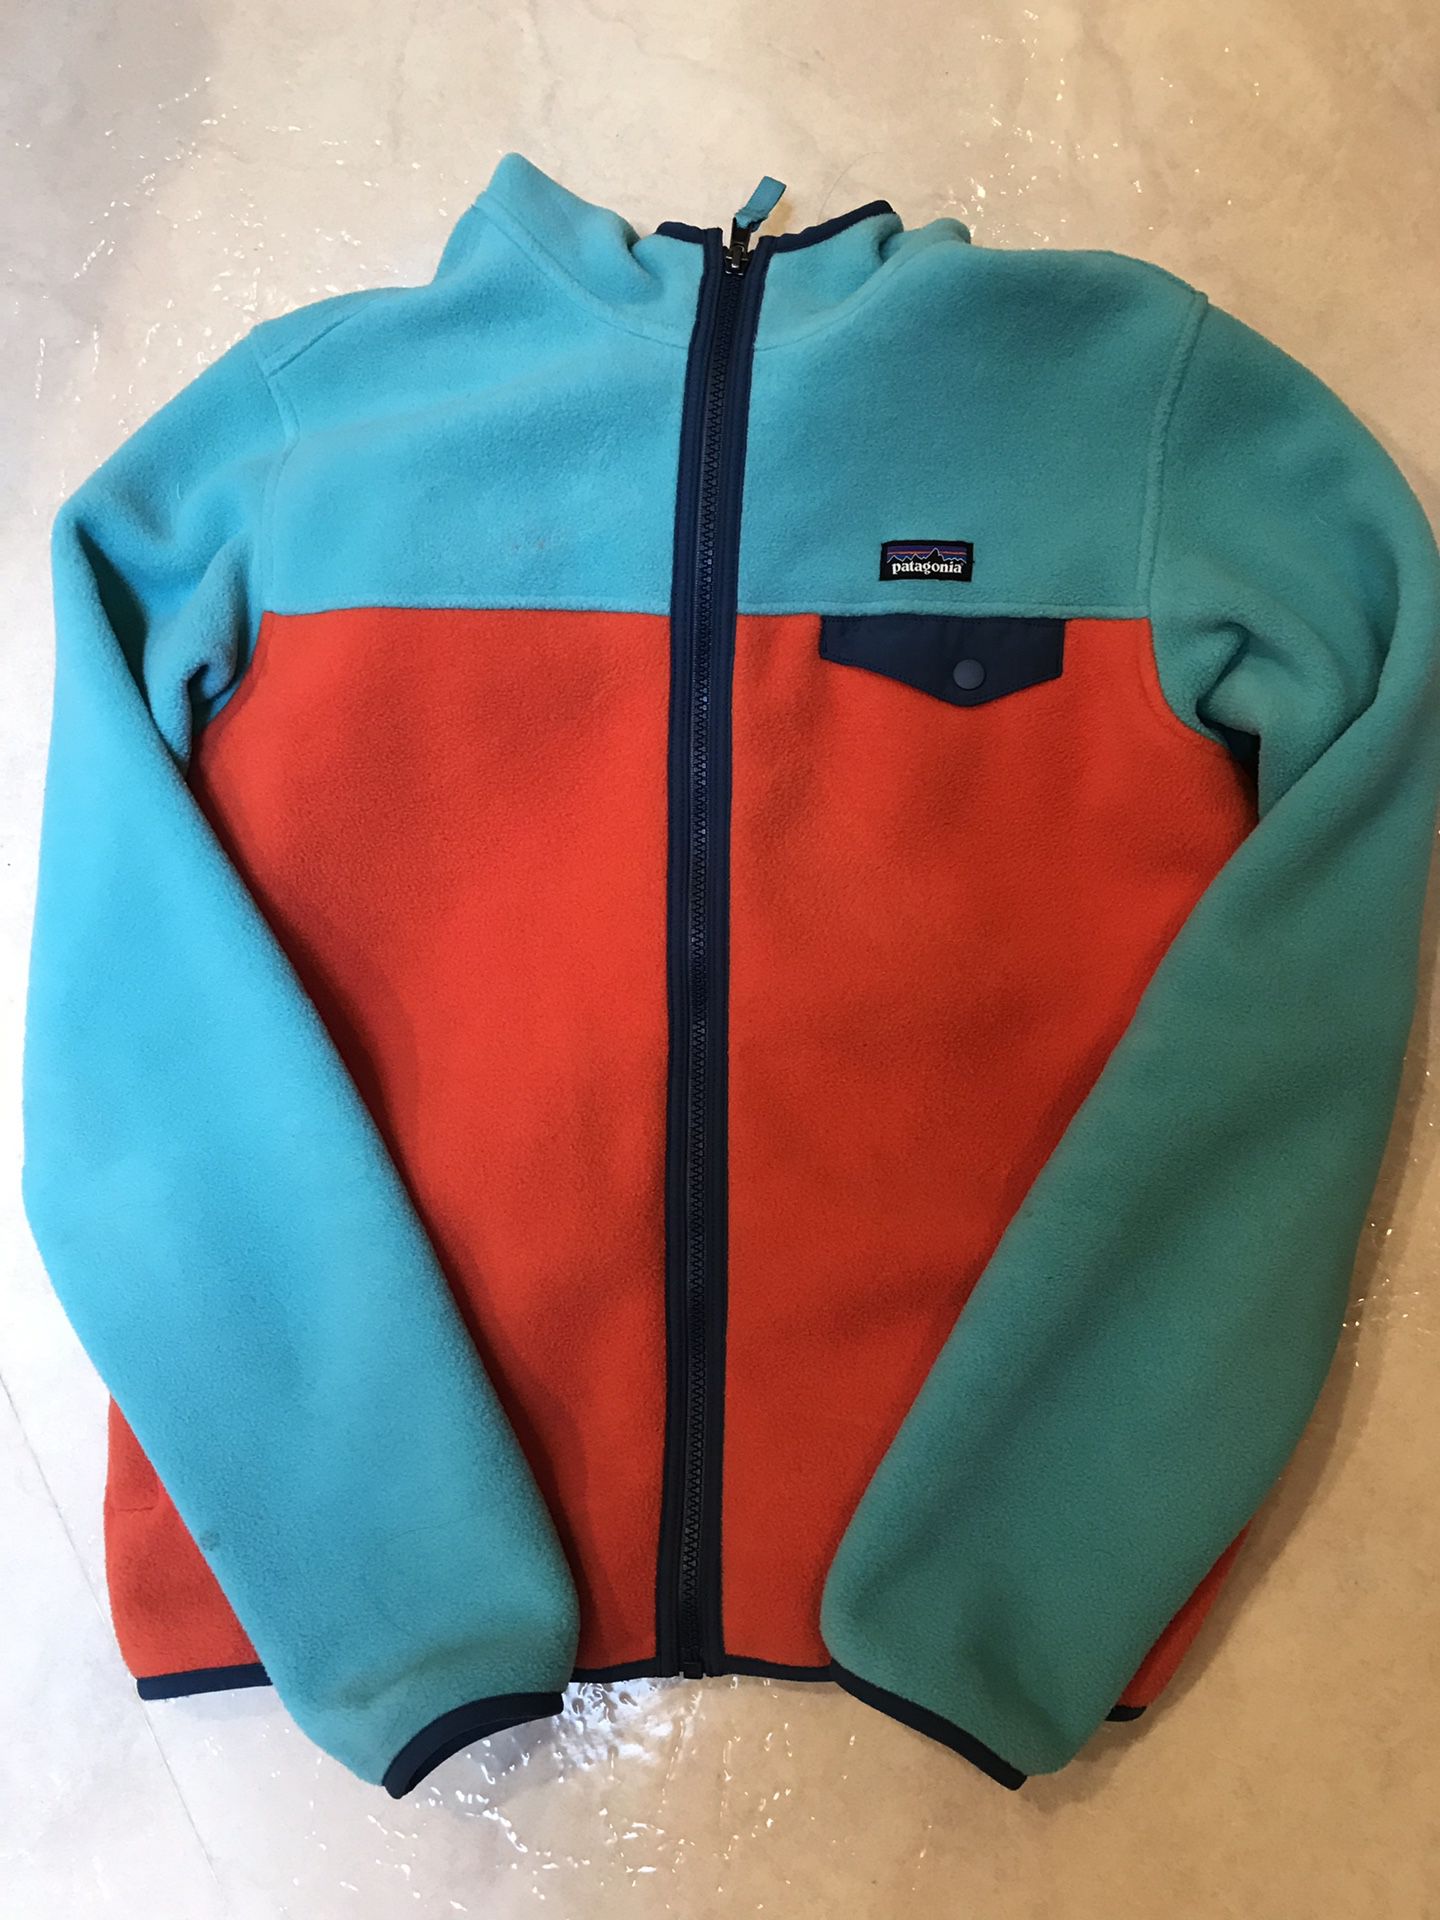 Patagonia boys xxl (16-18) - can also be worn as a women’s small